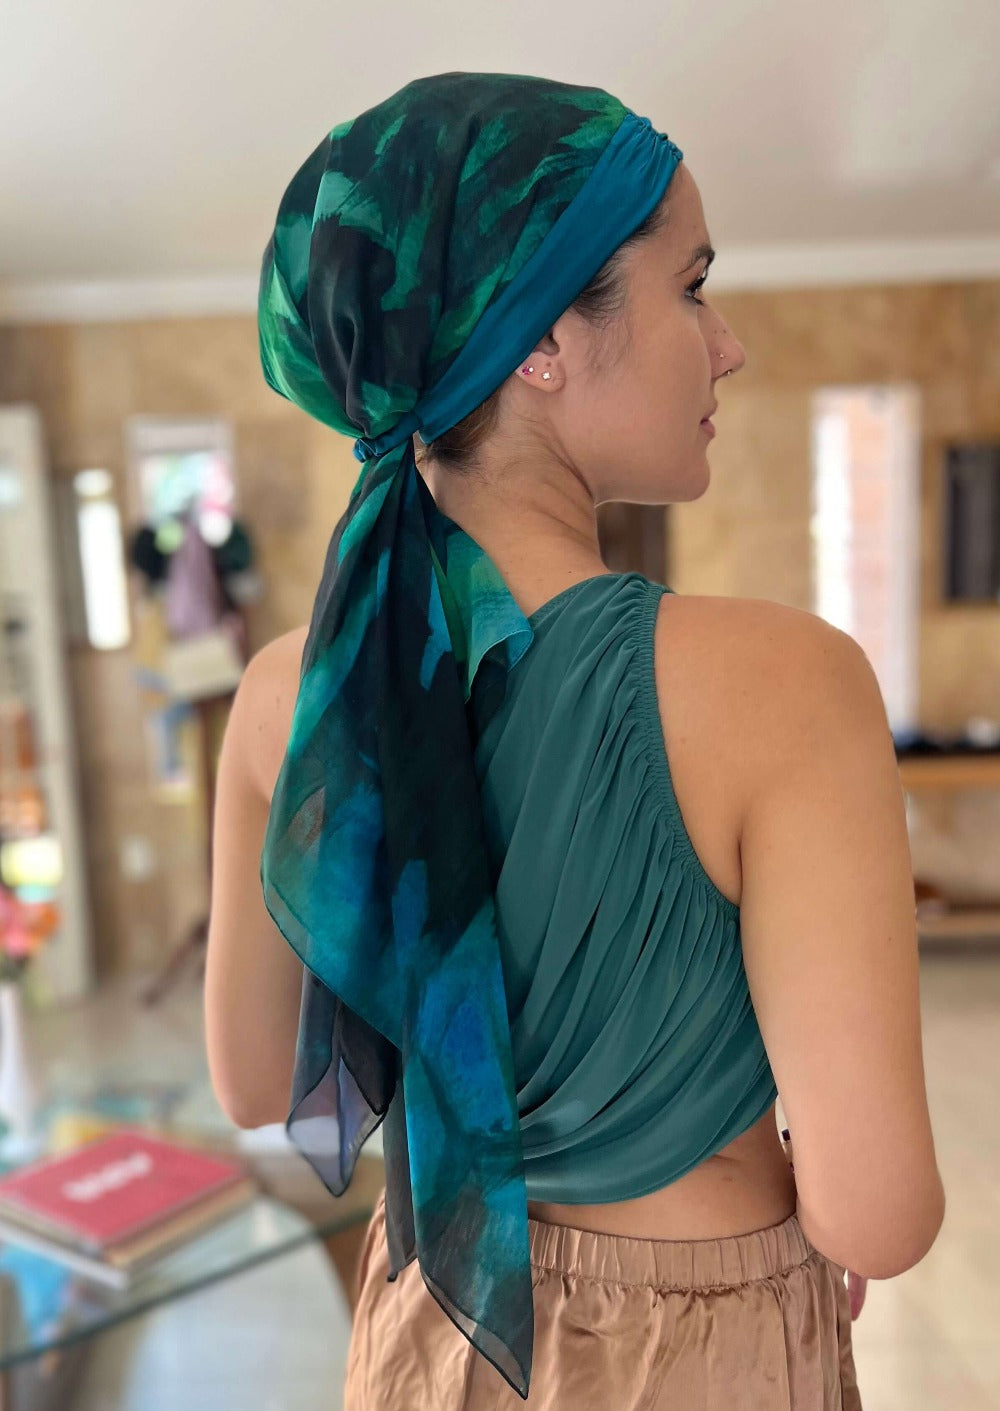 back view of a Beautiful lady in a luxurious chiffon and silk headscarf. The abstract print is peacock colored with brush strokes of black and green.